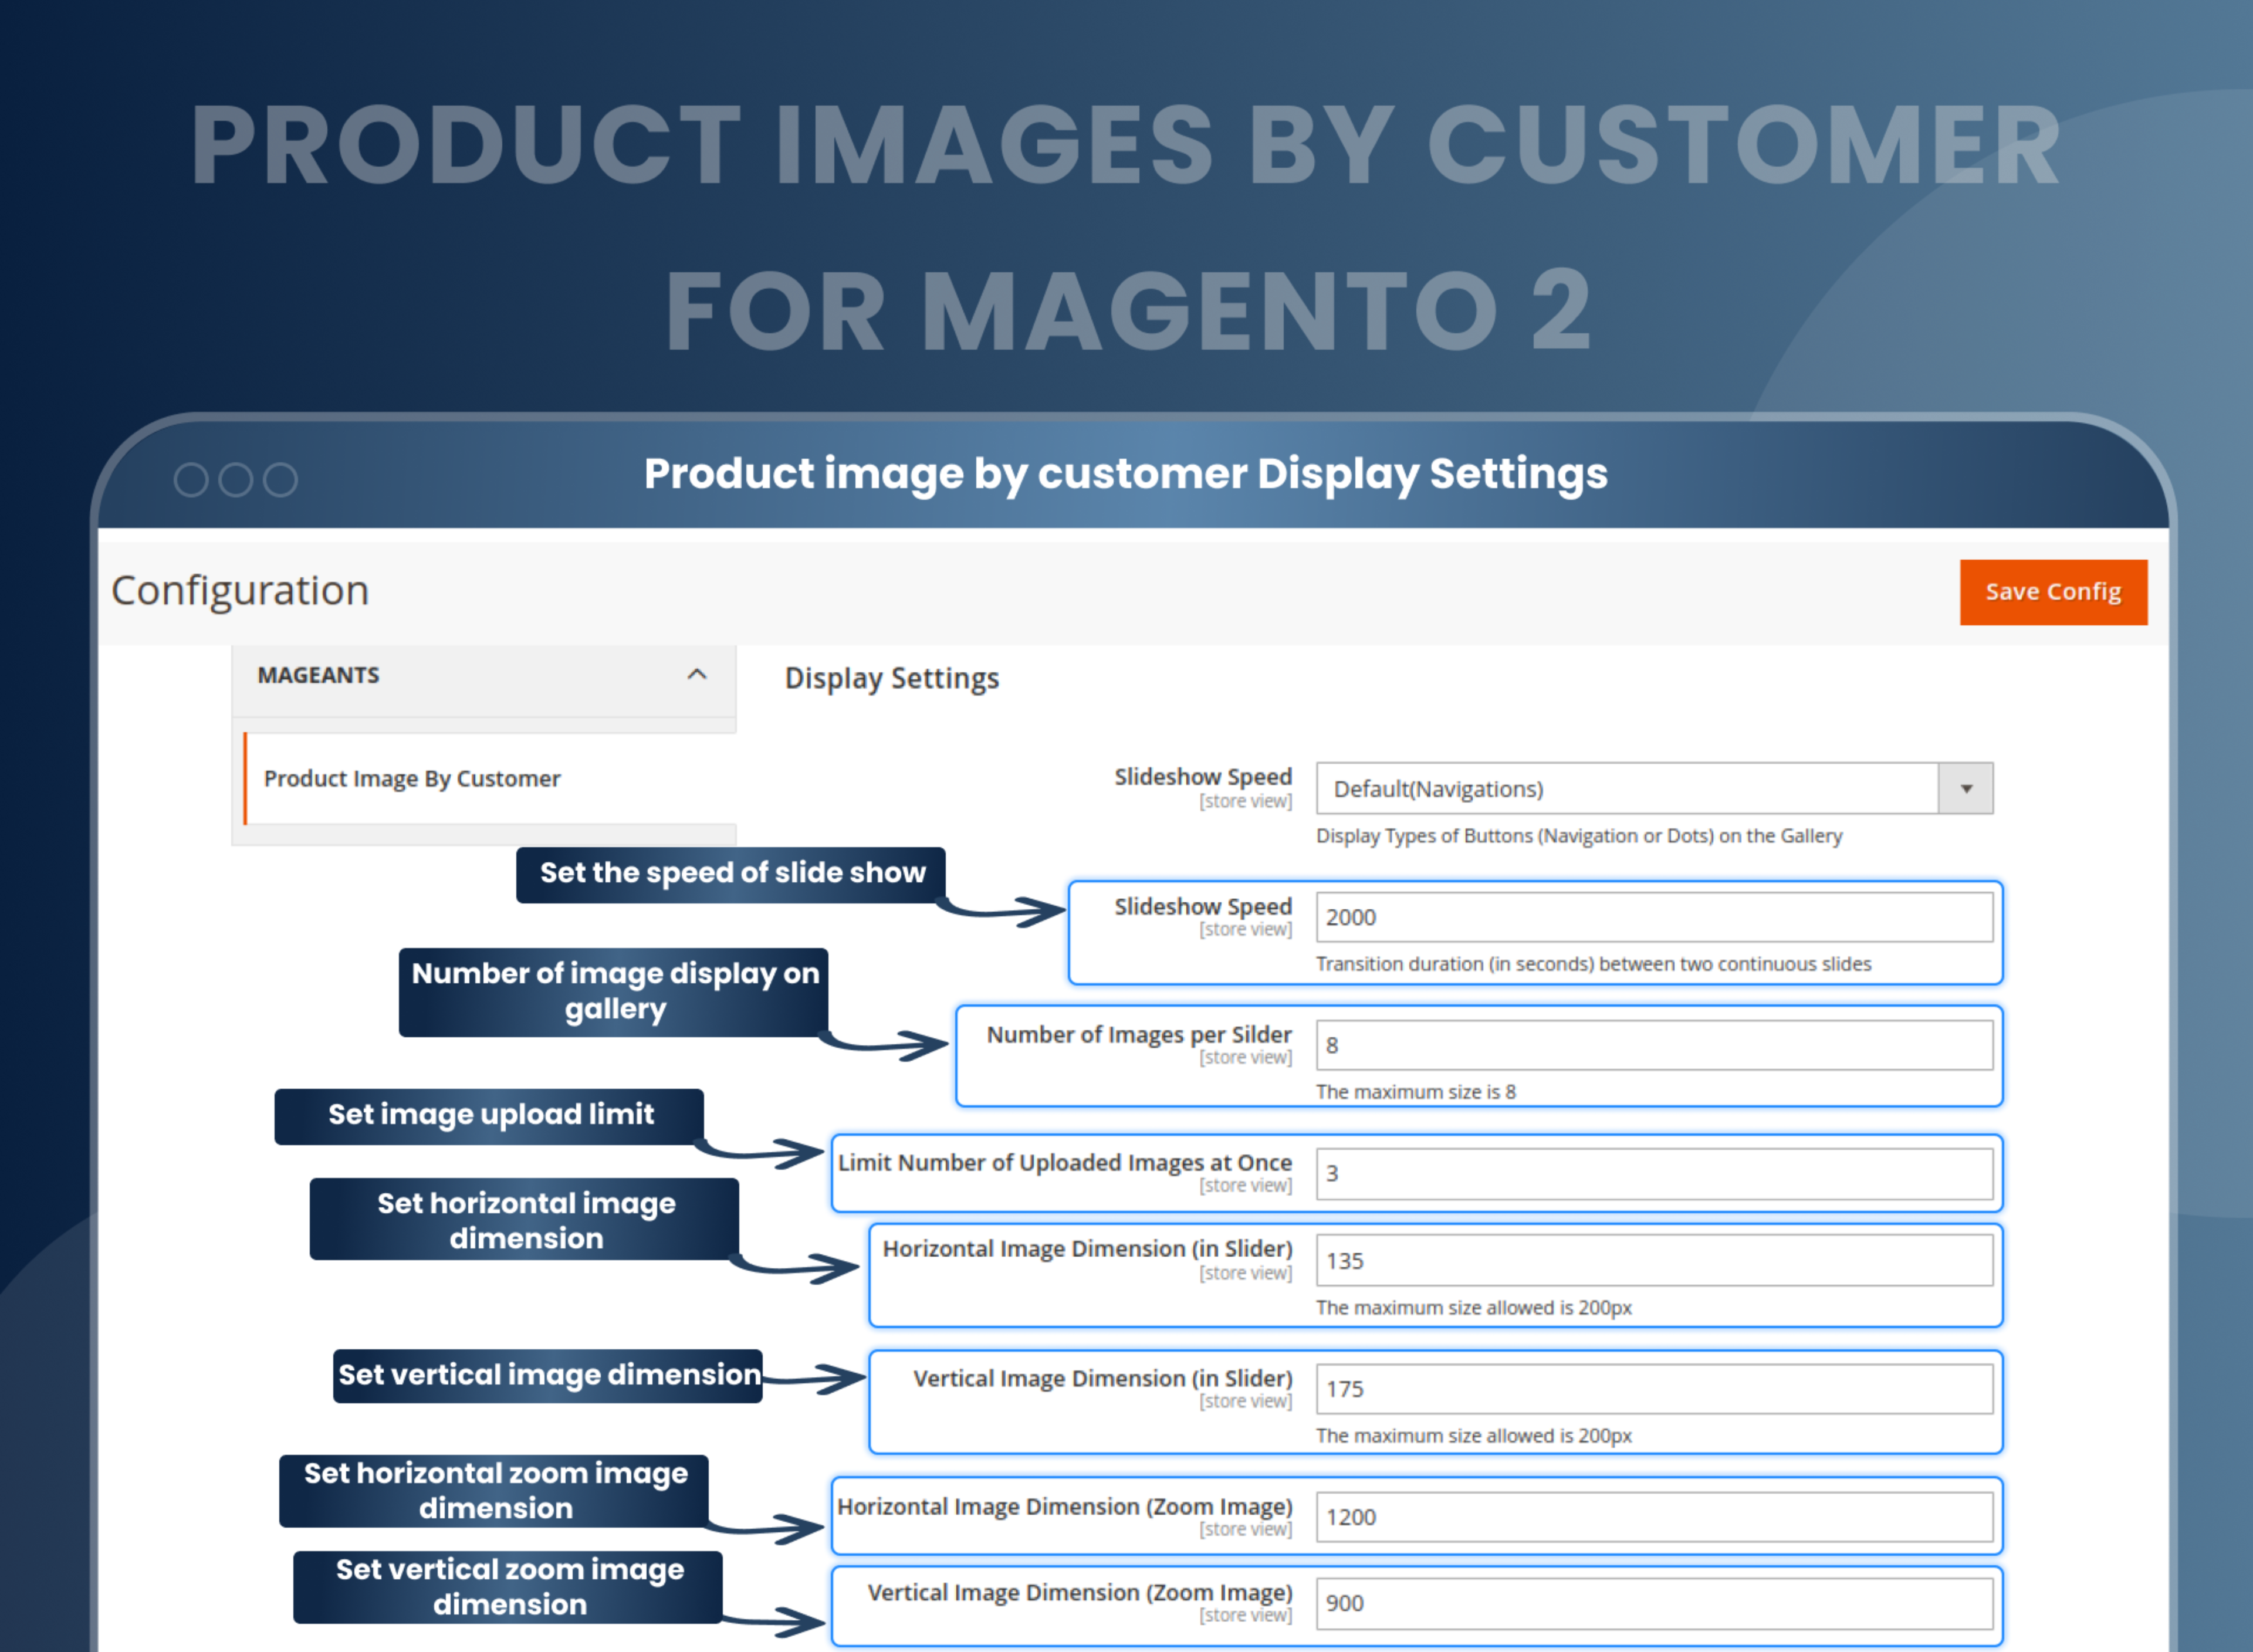 Product image by customer Display Settings